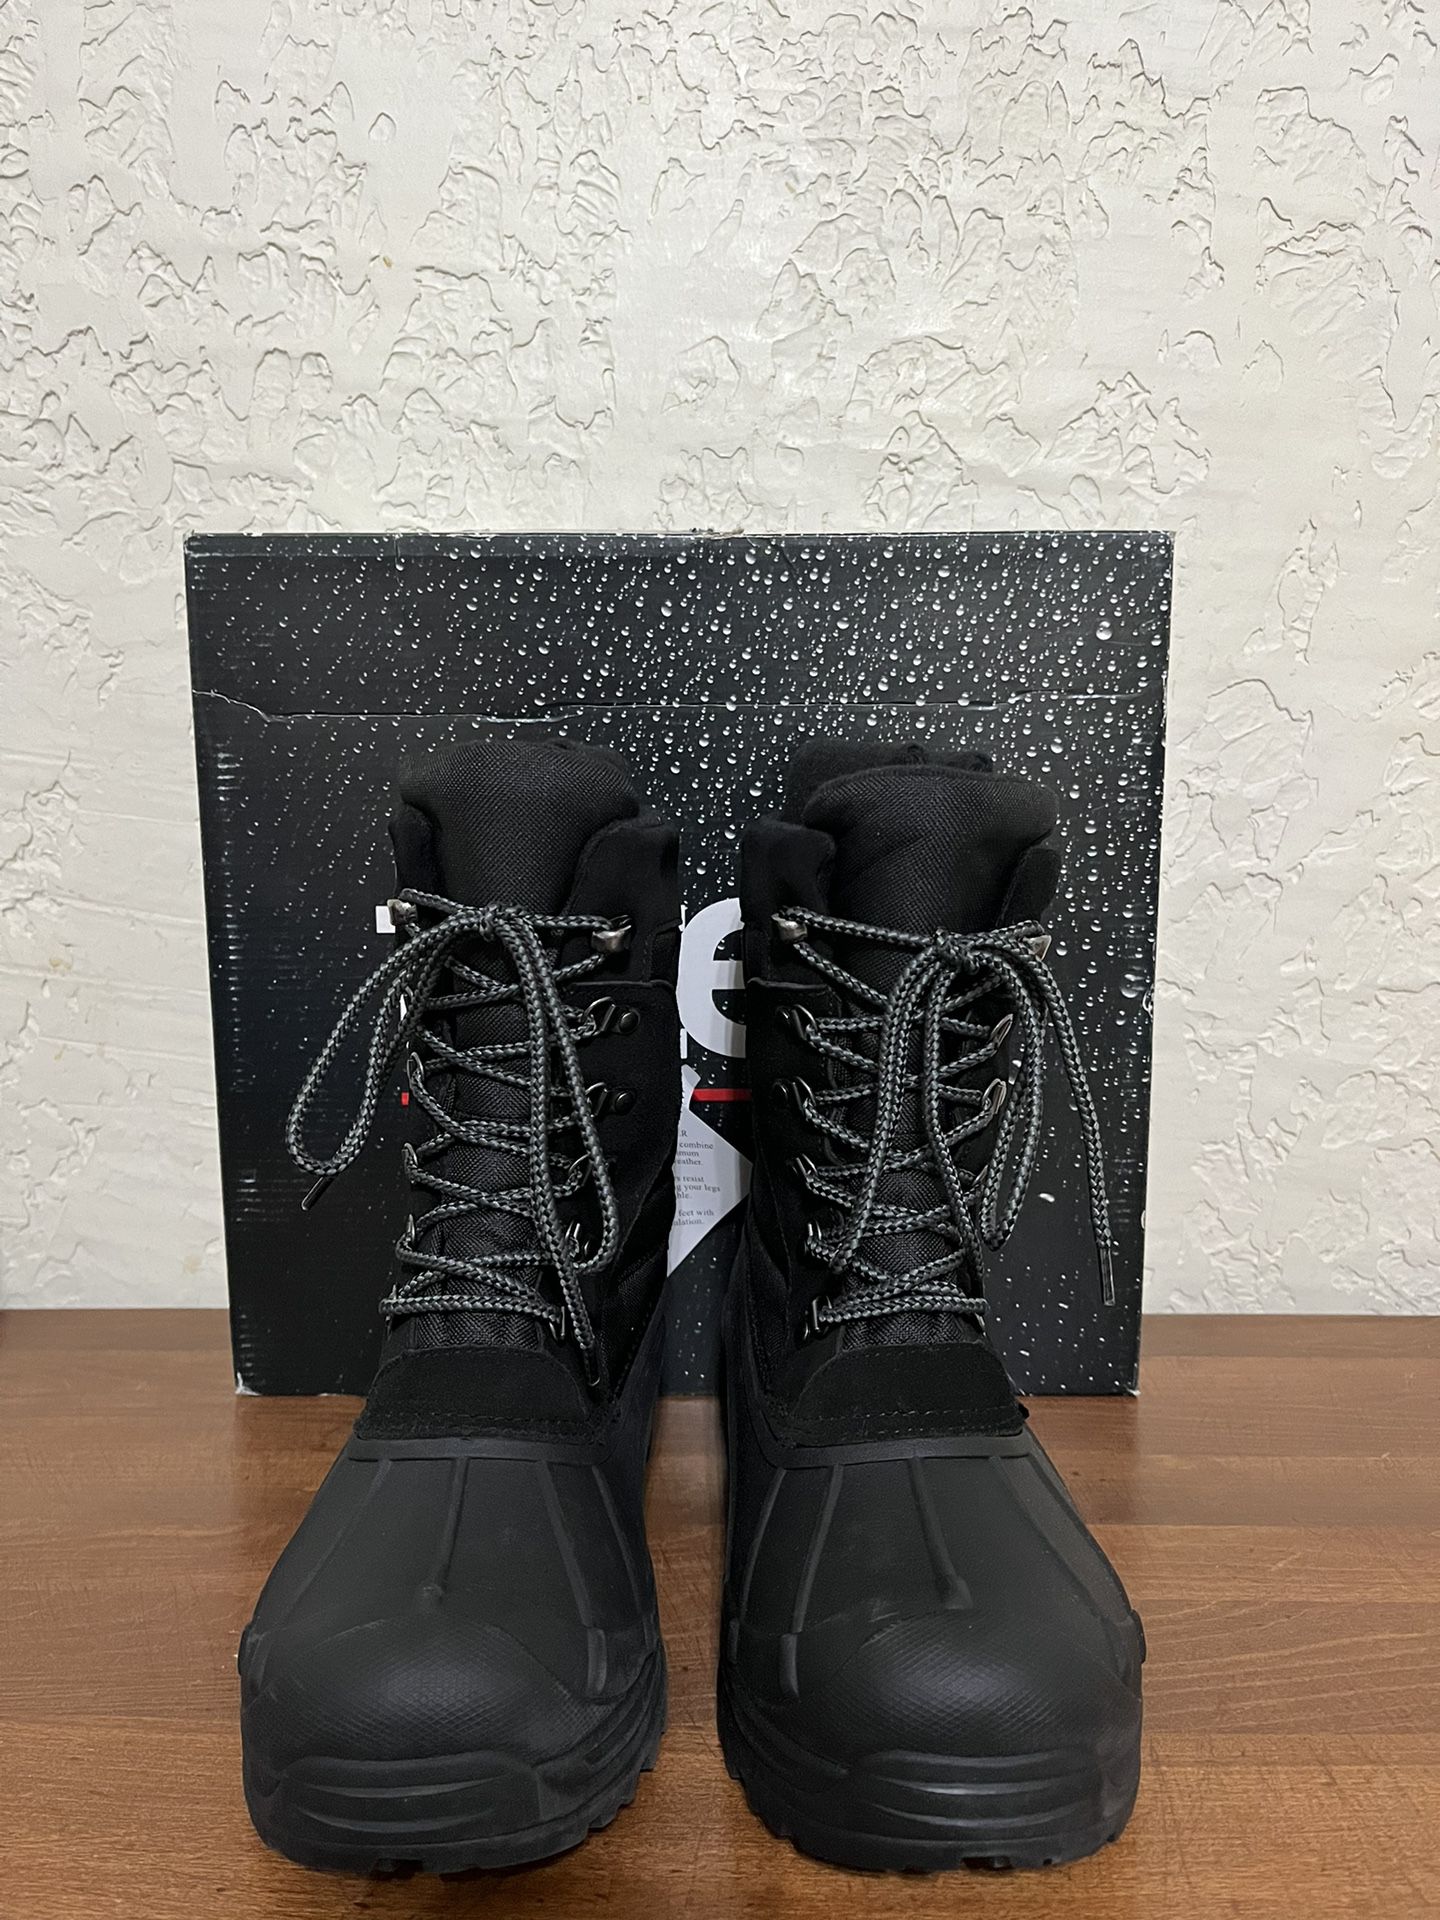 NEW Men's totes Briggs Waterproof Snow Boots (Size 9) 